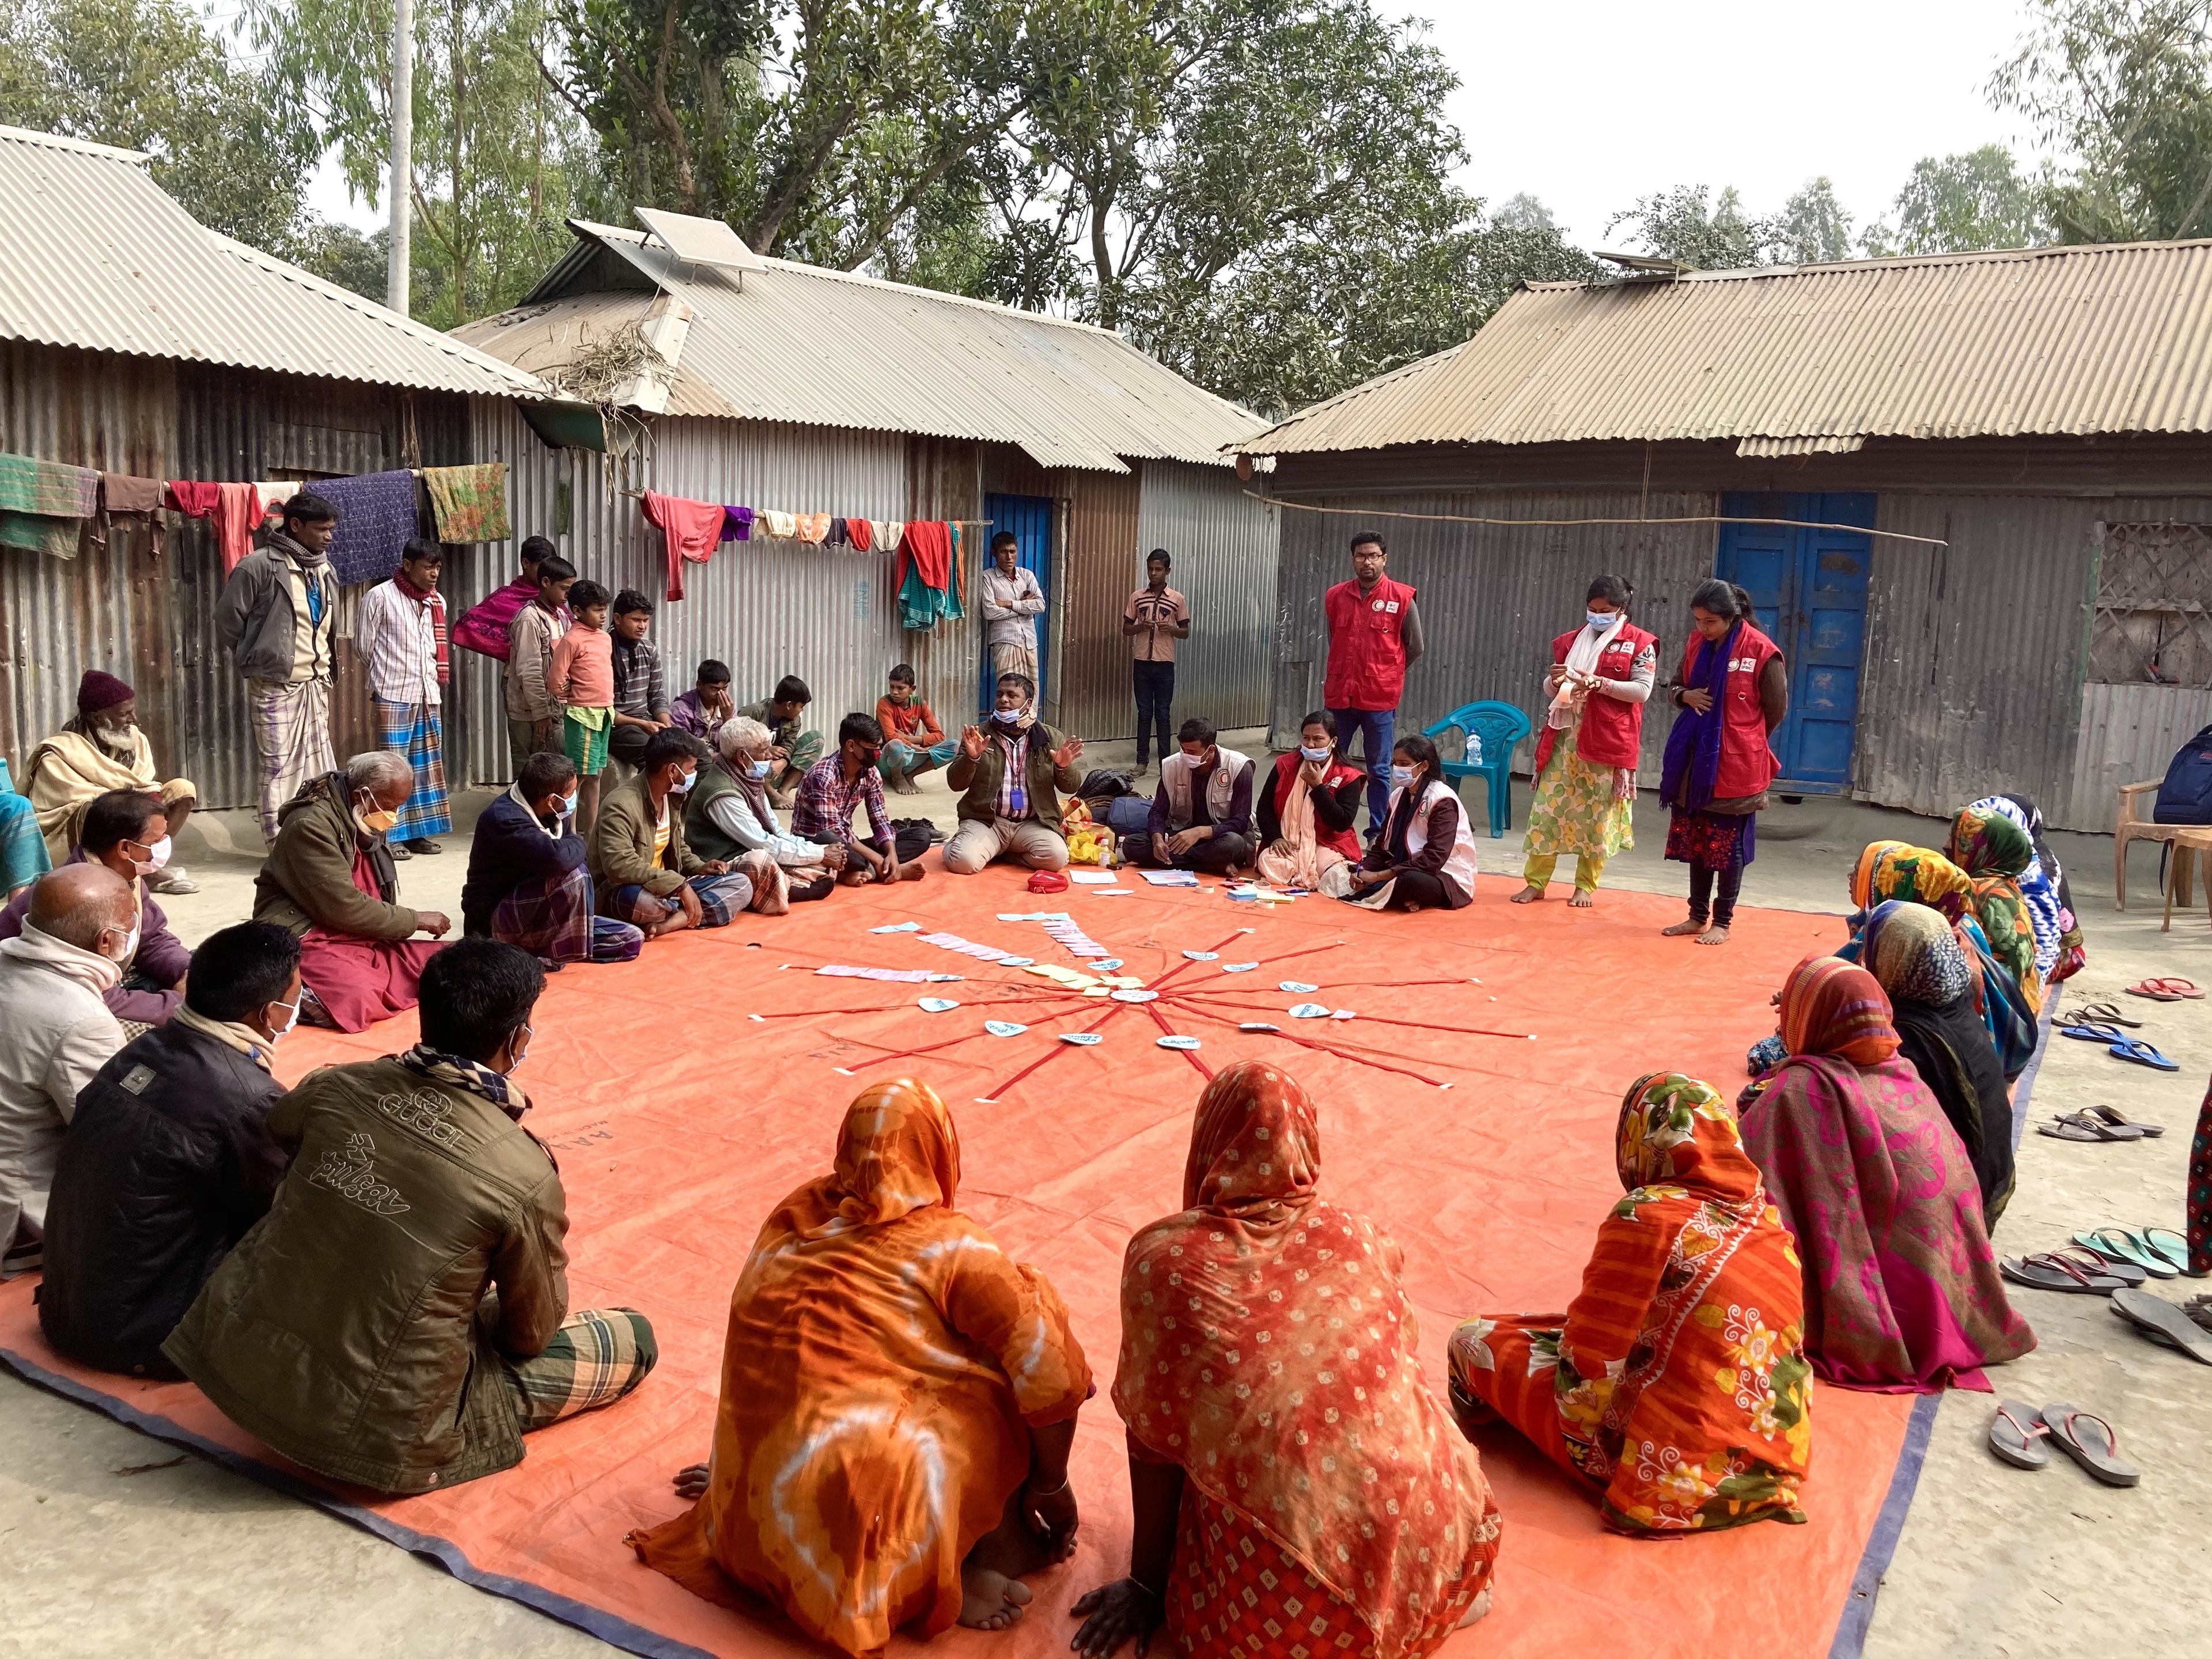 Women and men sit in a circle on the ground in a village in Bangladesh. They have laid out labeled cards in the center. Volunteers from the Bangladesh Red Crescent can also be seen.